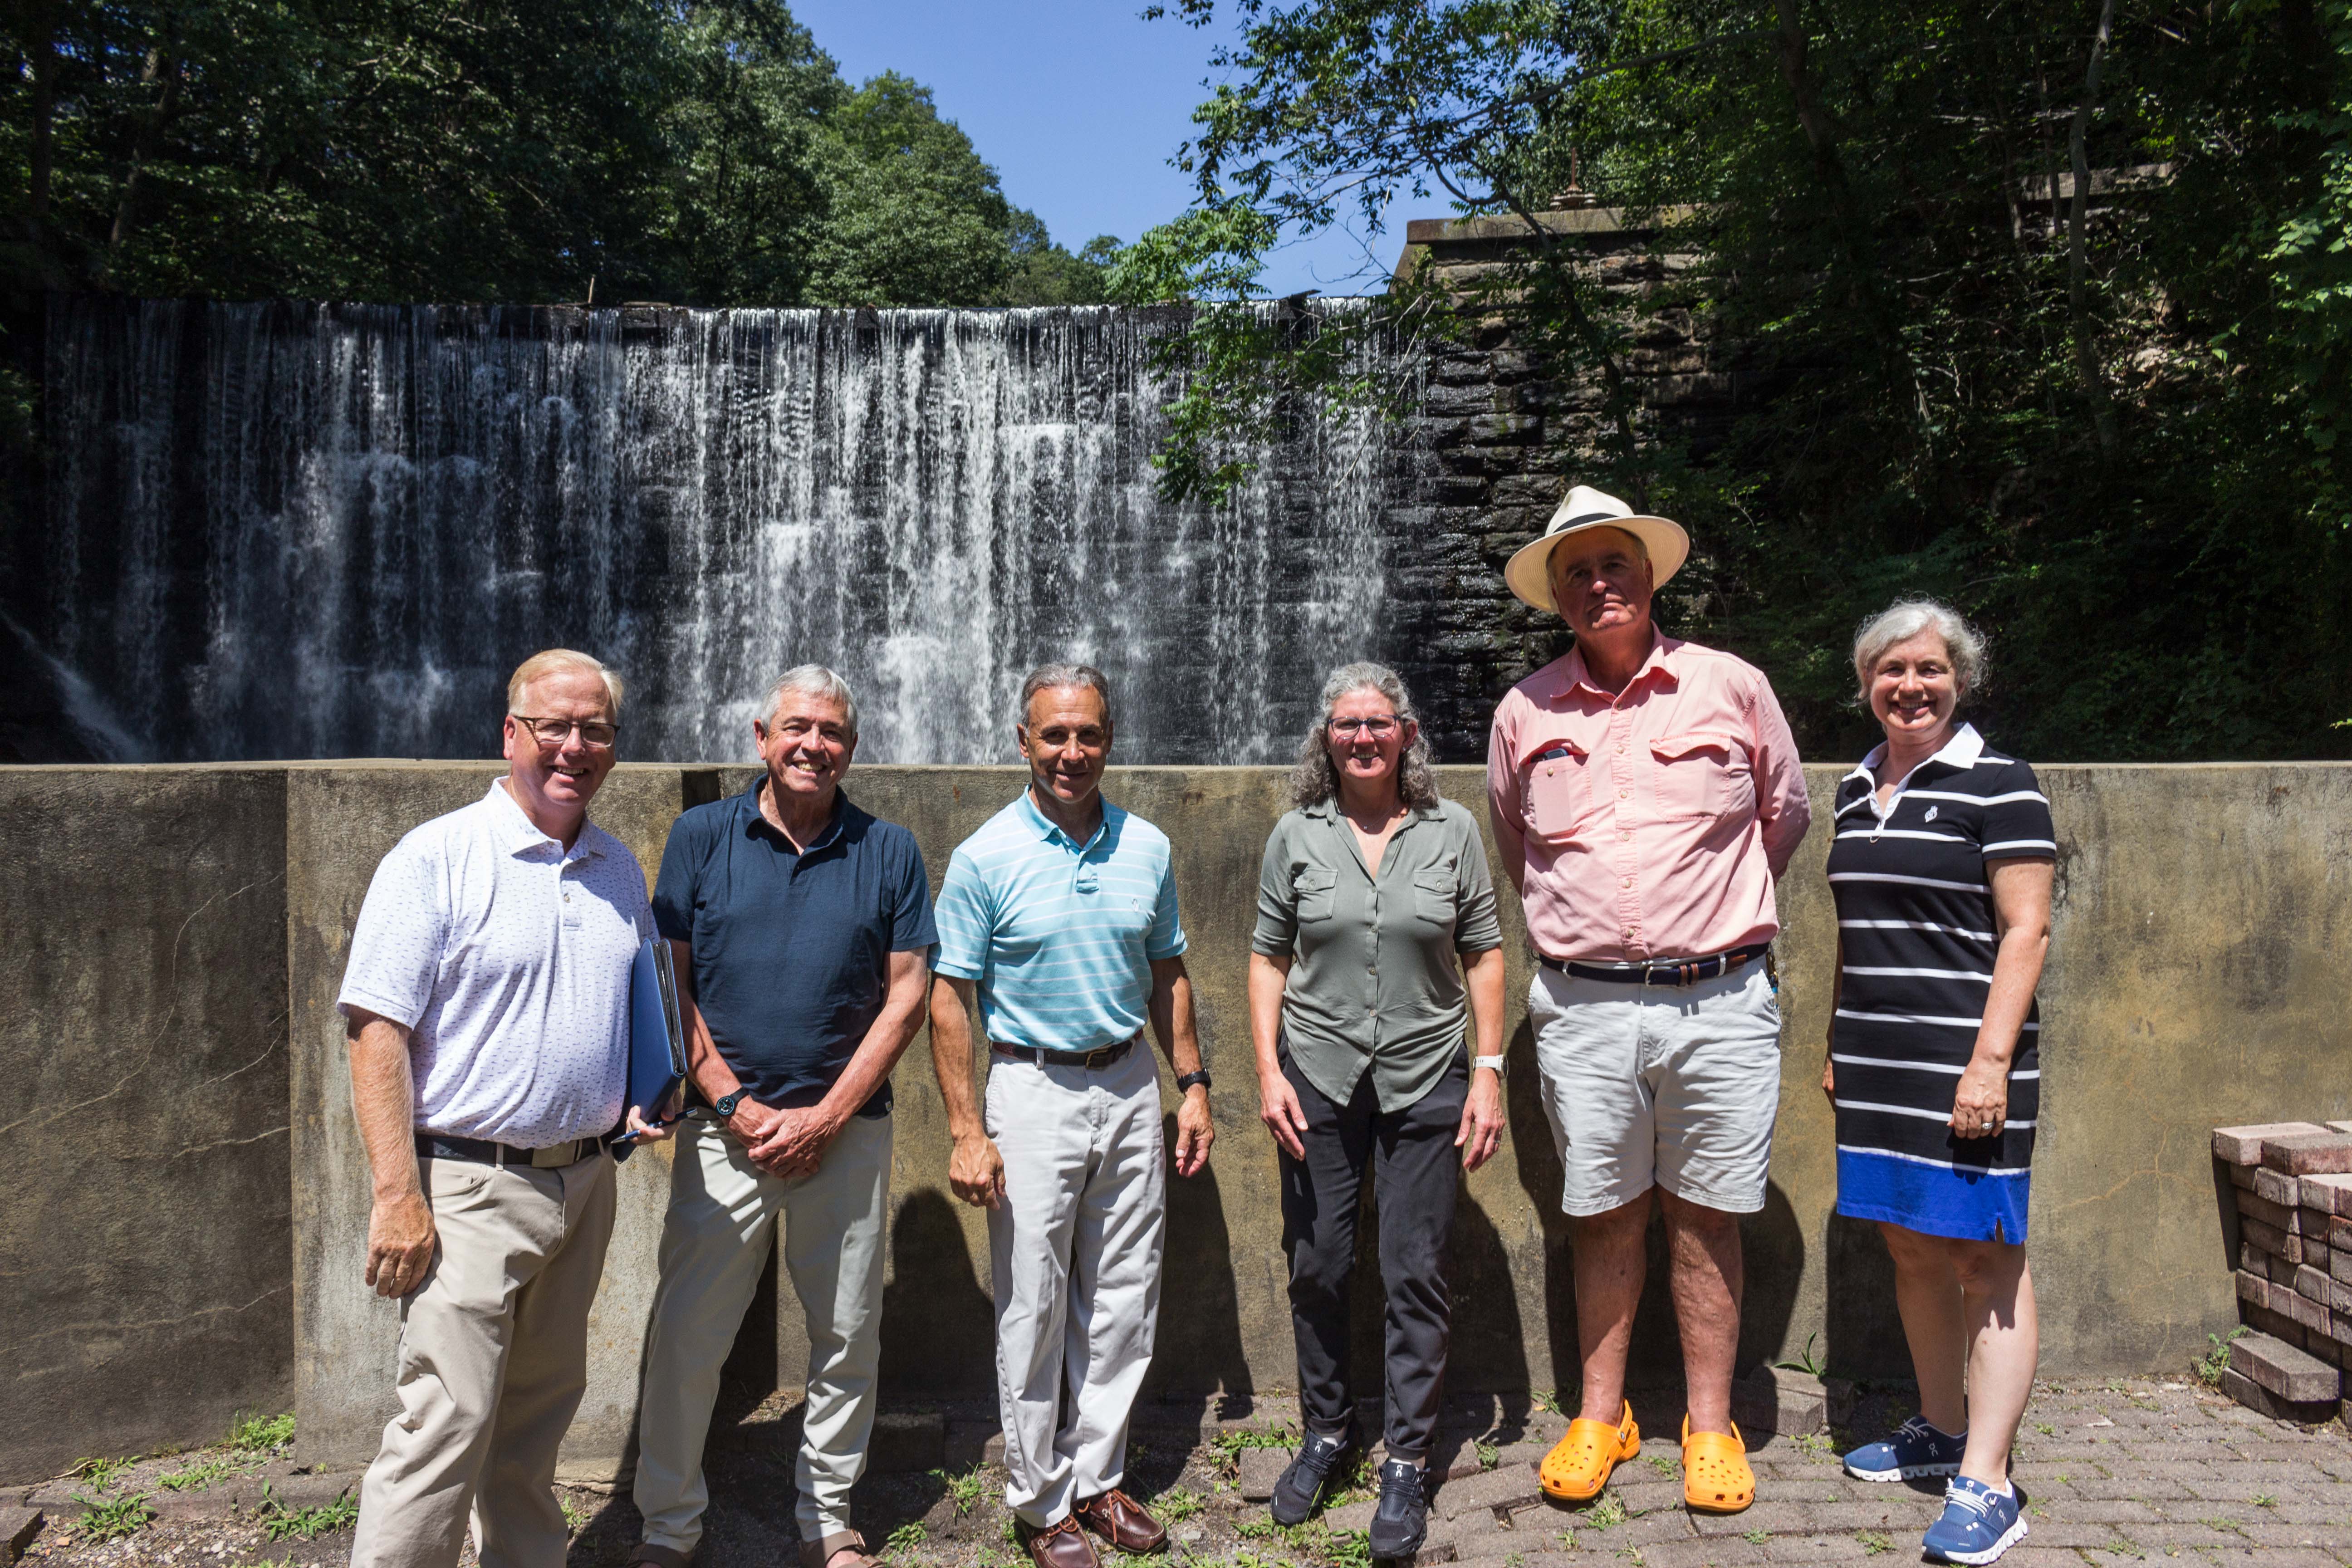 Commissioner Mark Boughton visited Greenwich recently to visit several sites that may be eligible for federal funding through the Infrastructure Investment and Jobs Act.